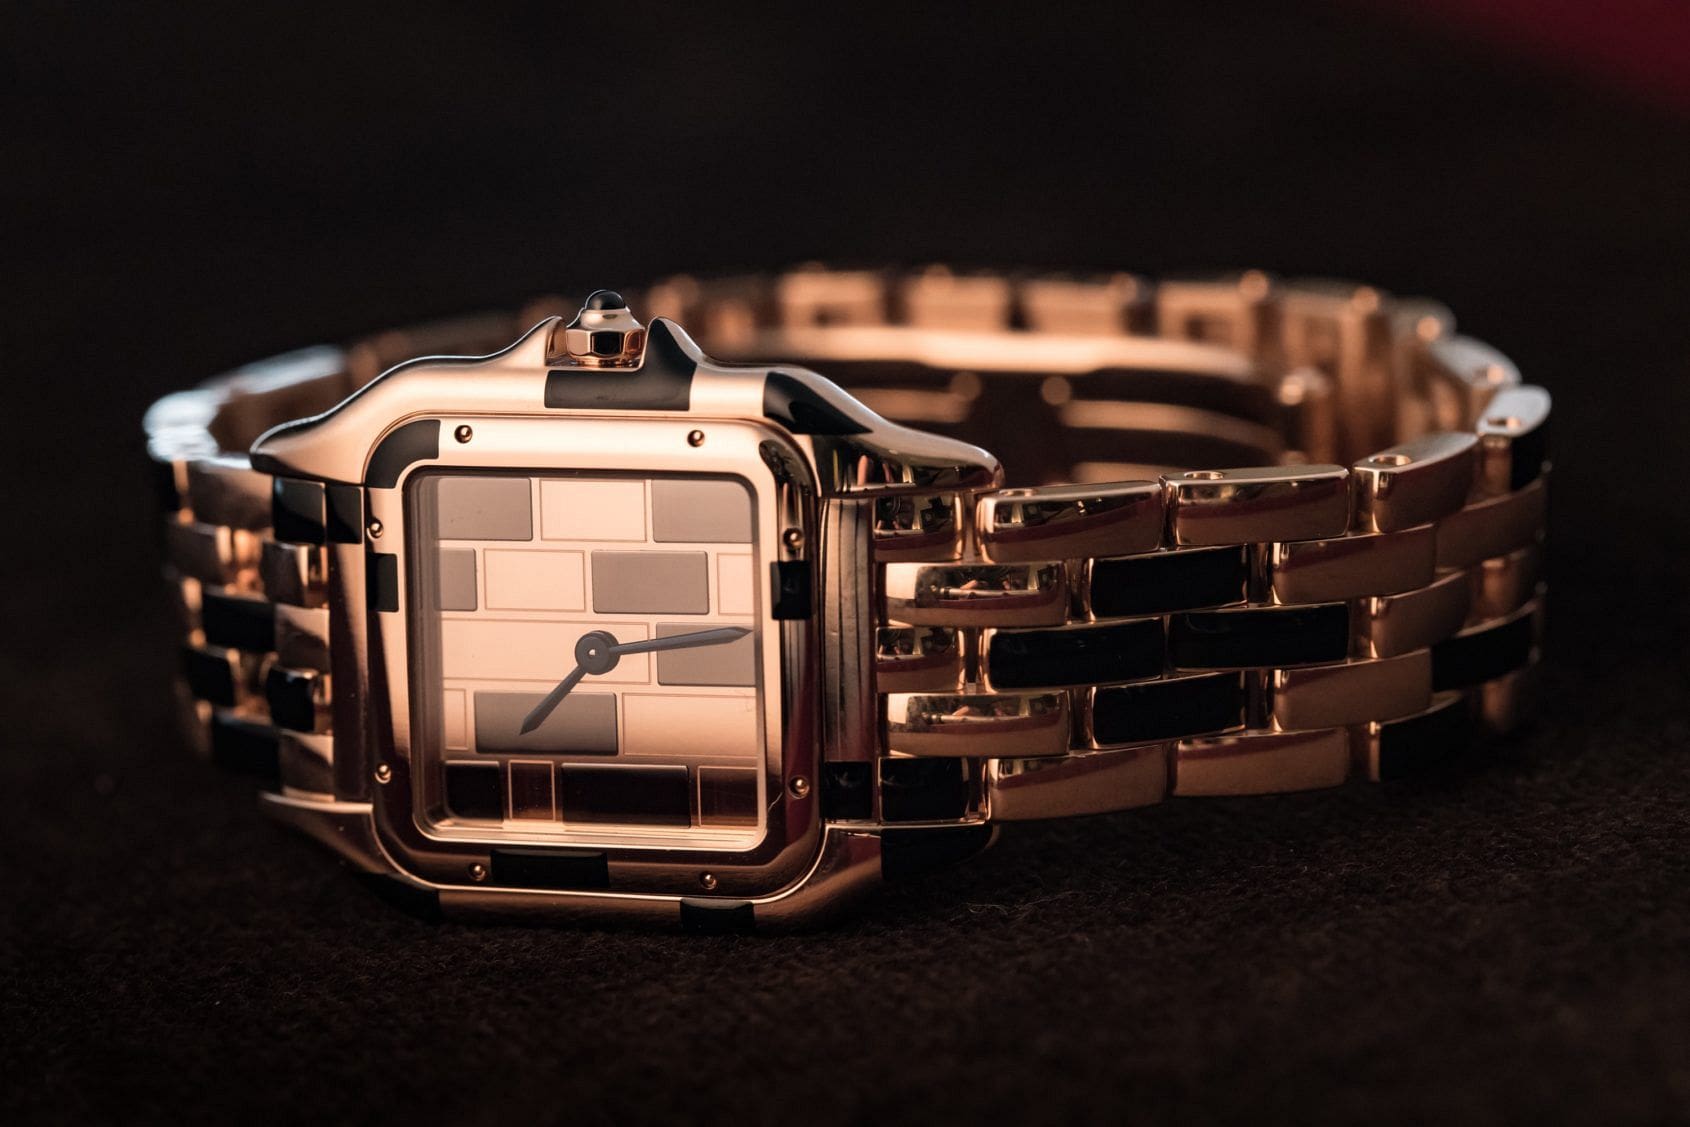 INTRODUCING: The new Panthère de Cartier – an ’80s icon back on the prowl